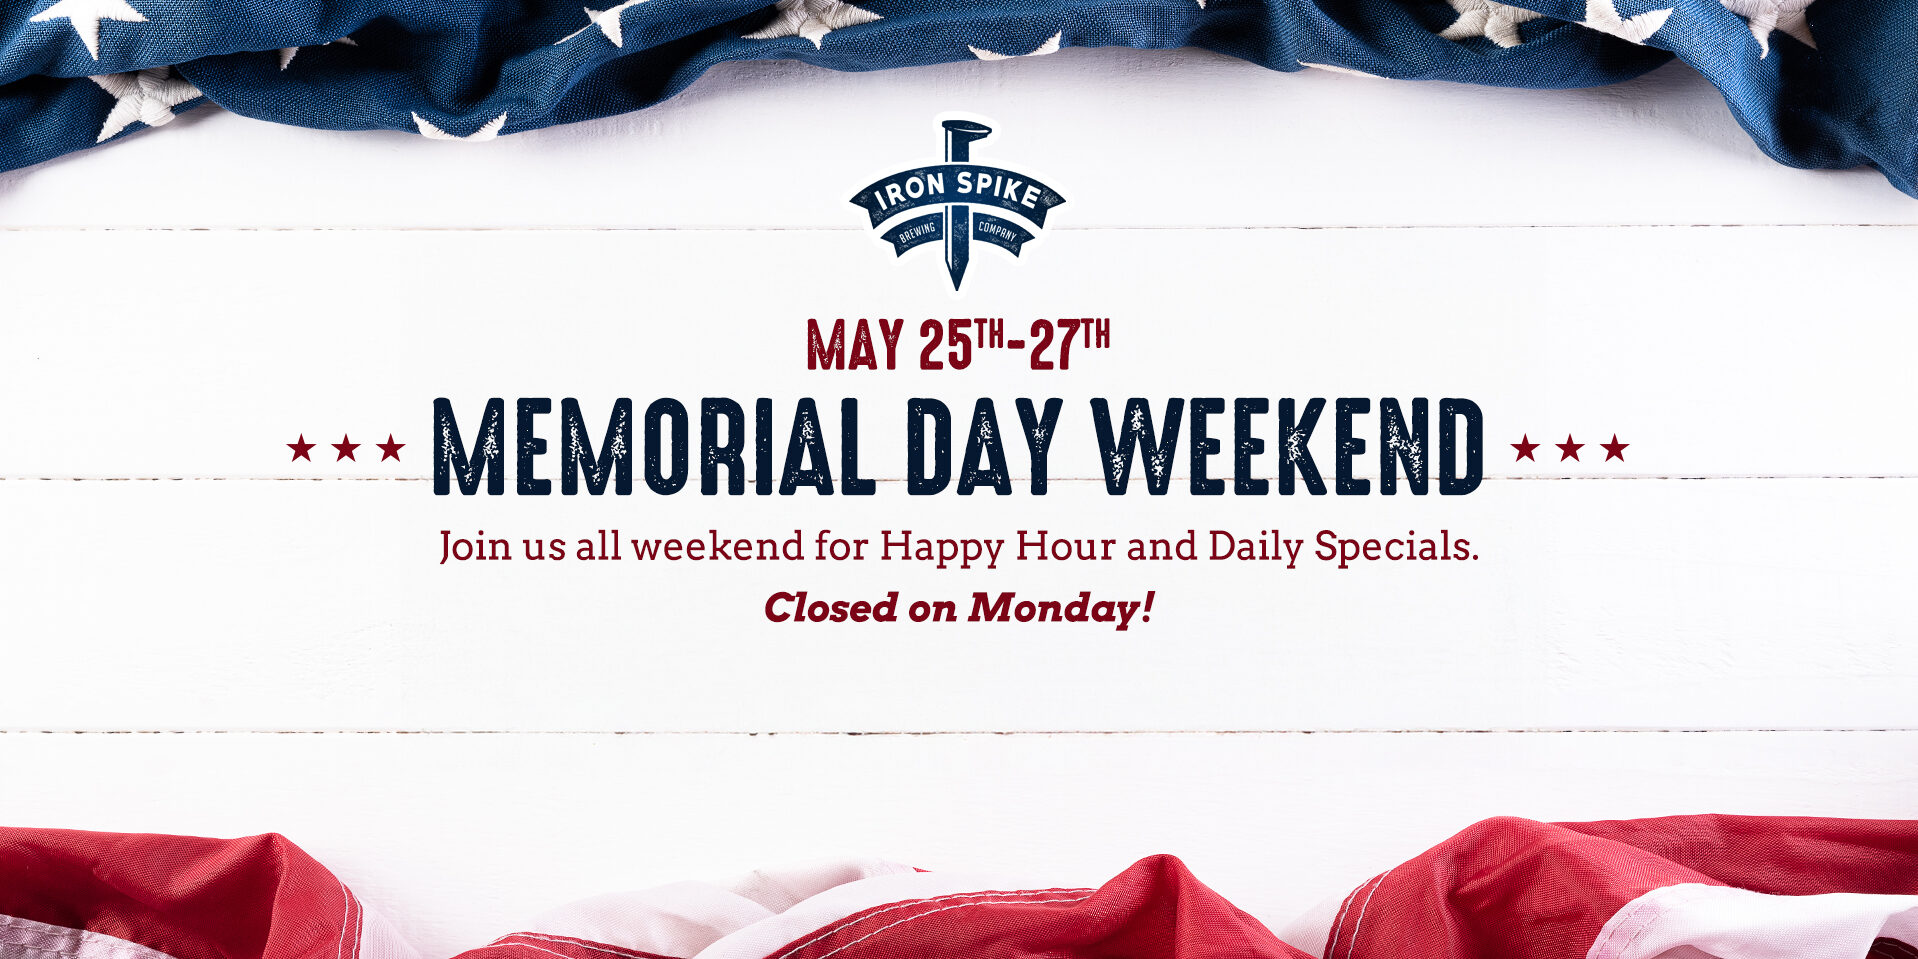 May 25th-27th: Memorial Day weekend